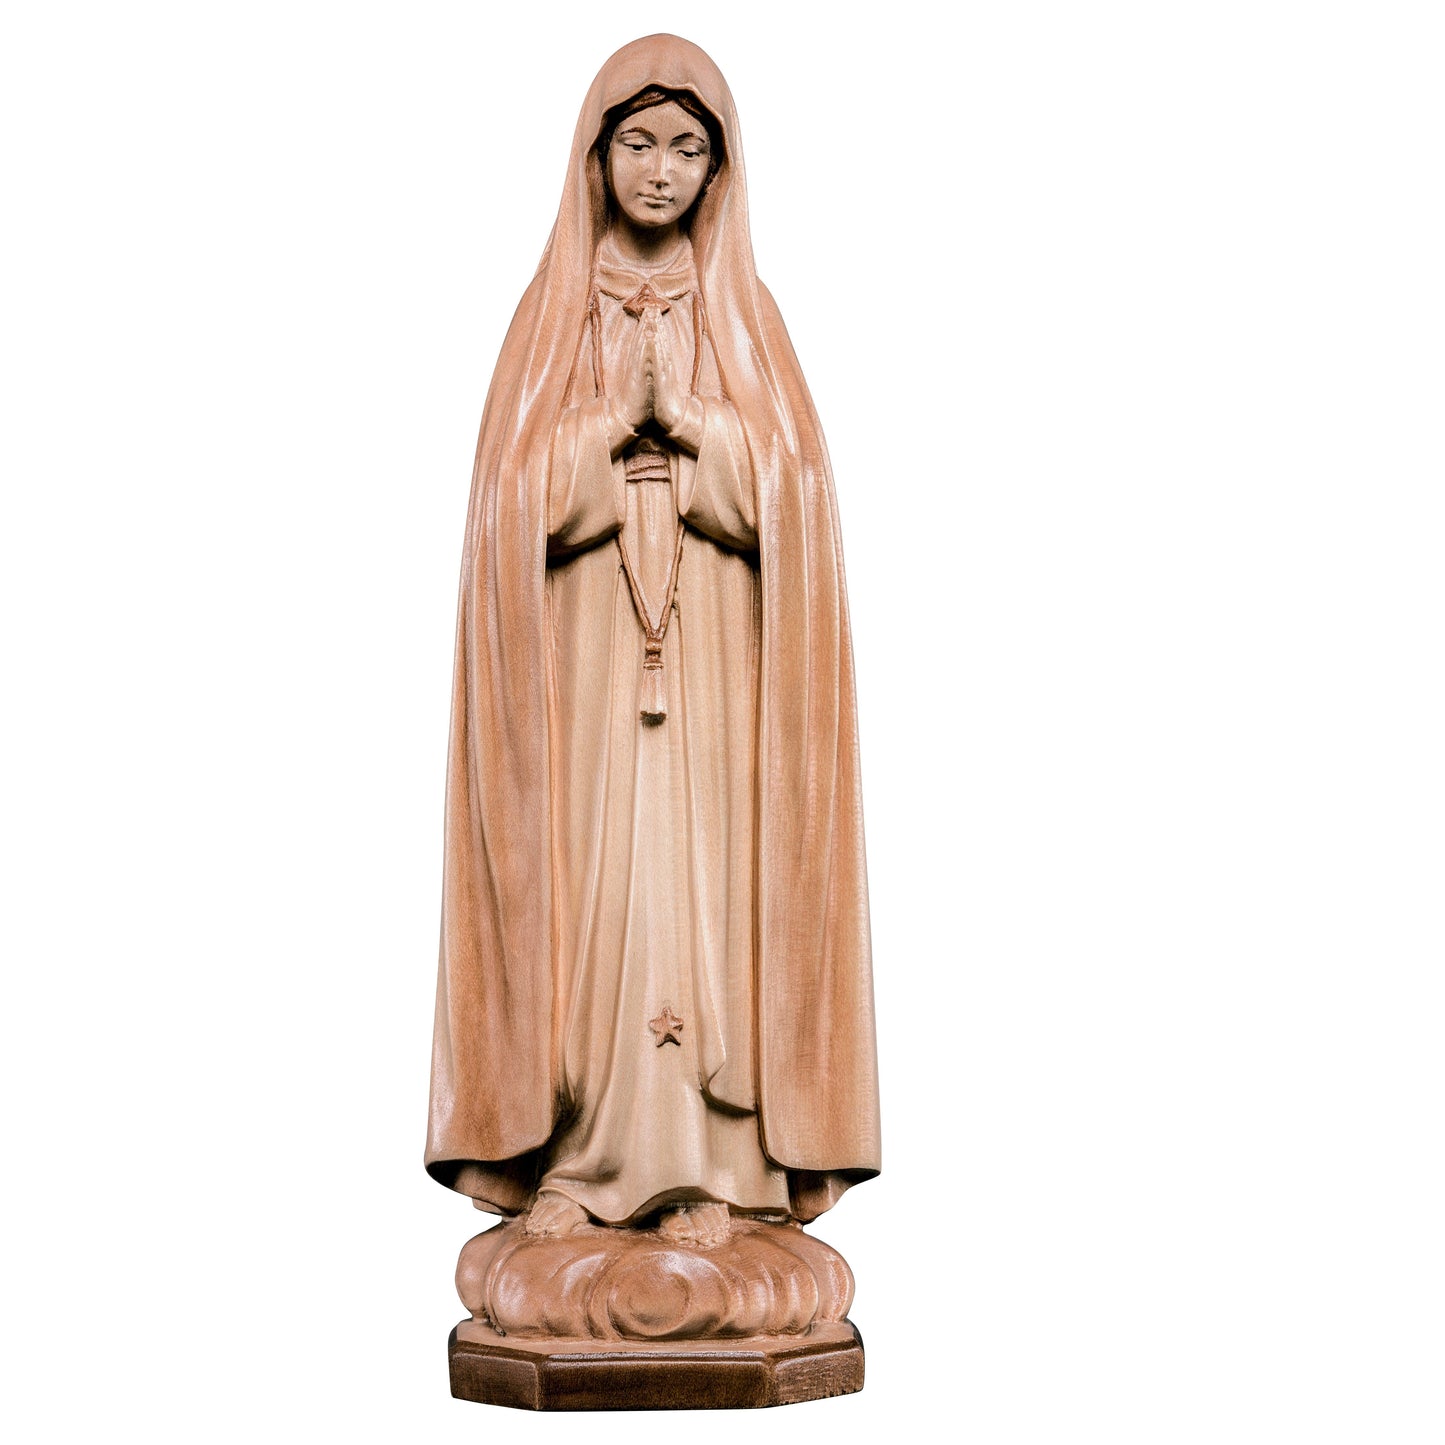 MONDO CATTOLICO Glossy / 10 cm (3.9 in) Wooden statue of Our Lady of Fátima